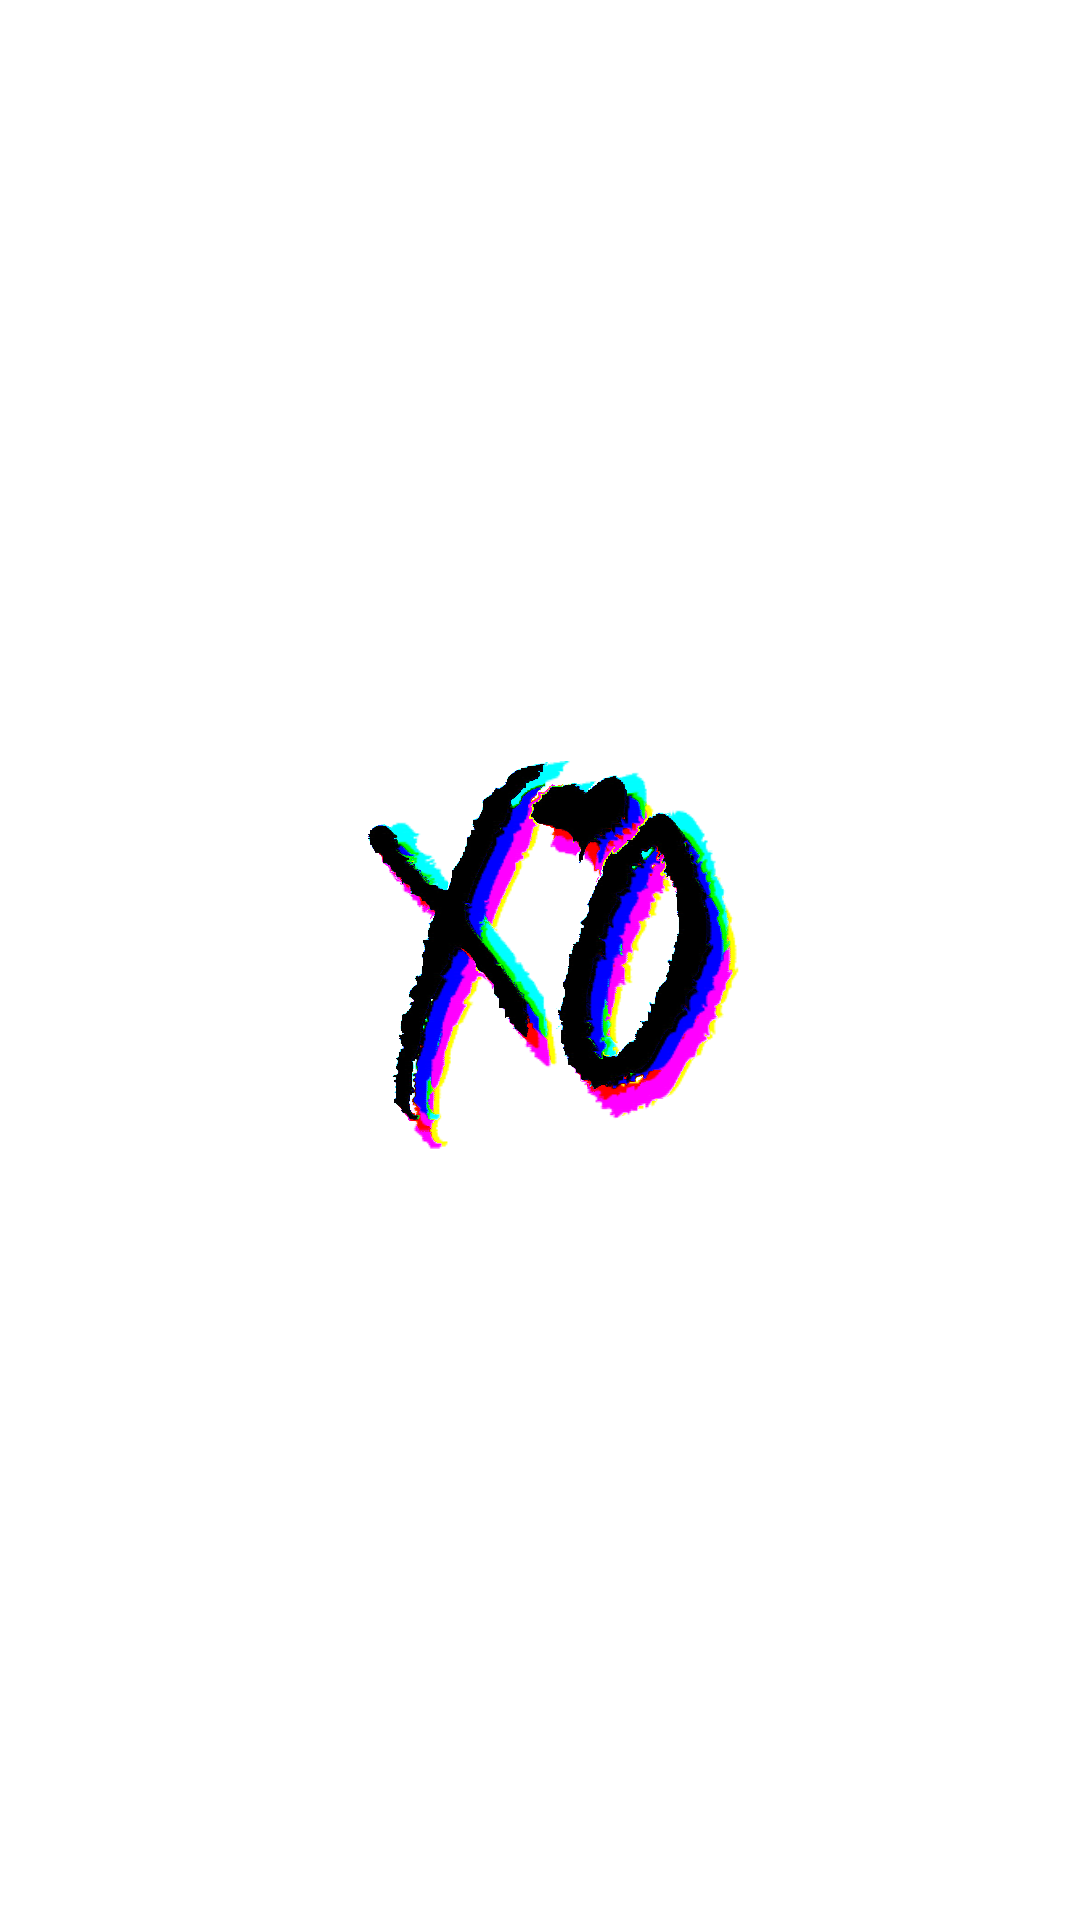 The Weeknd Xo Wallpapers